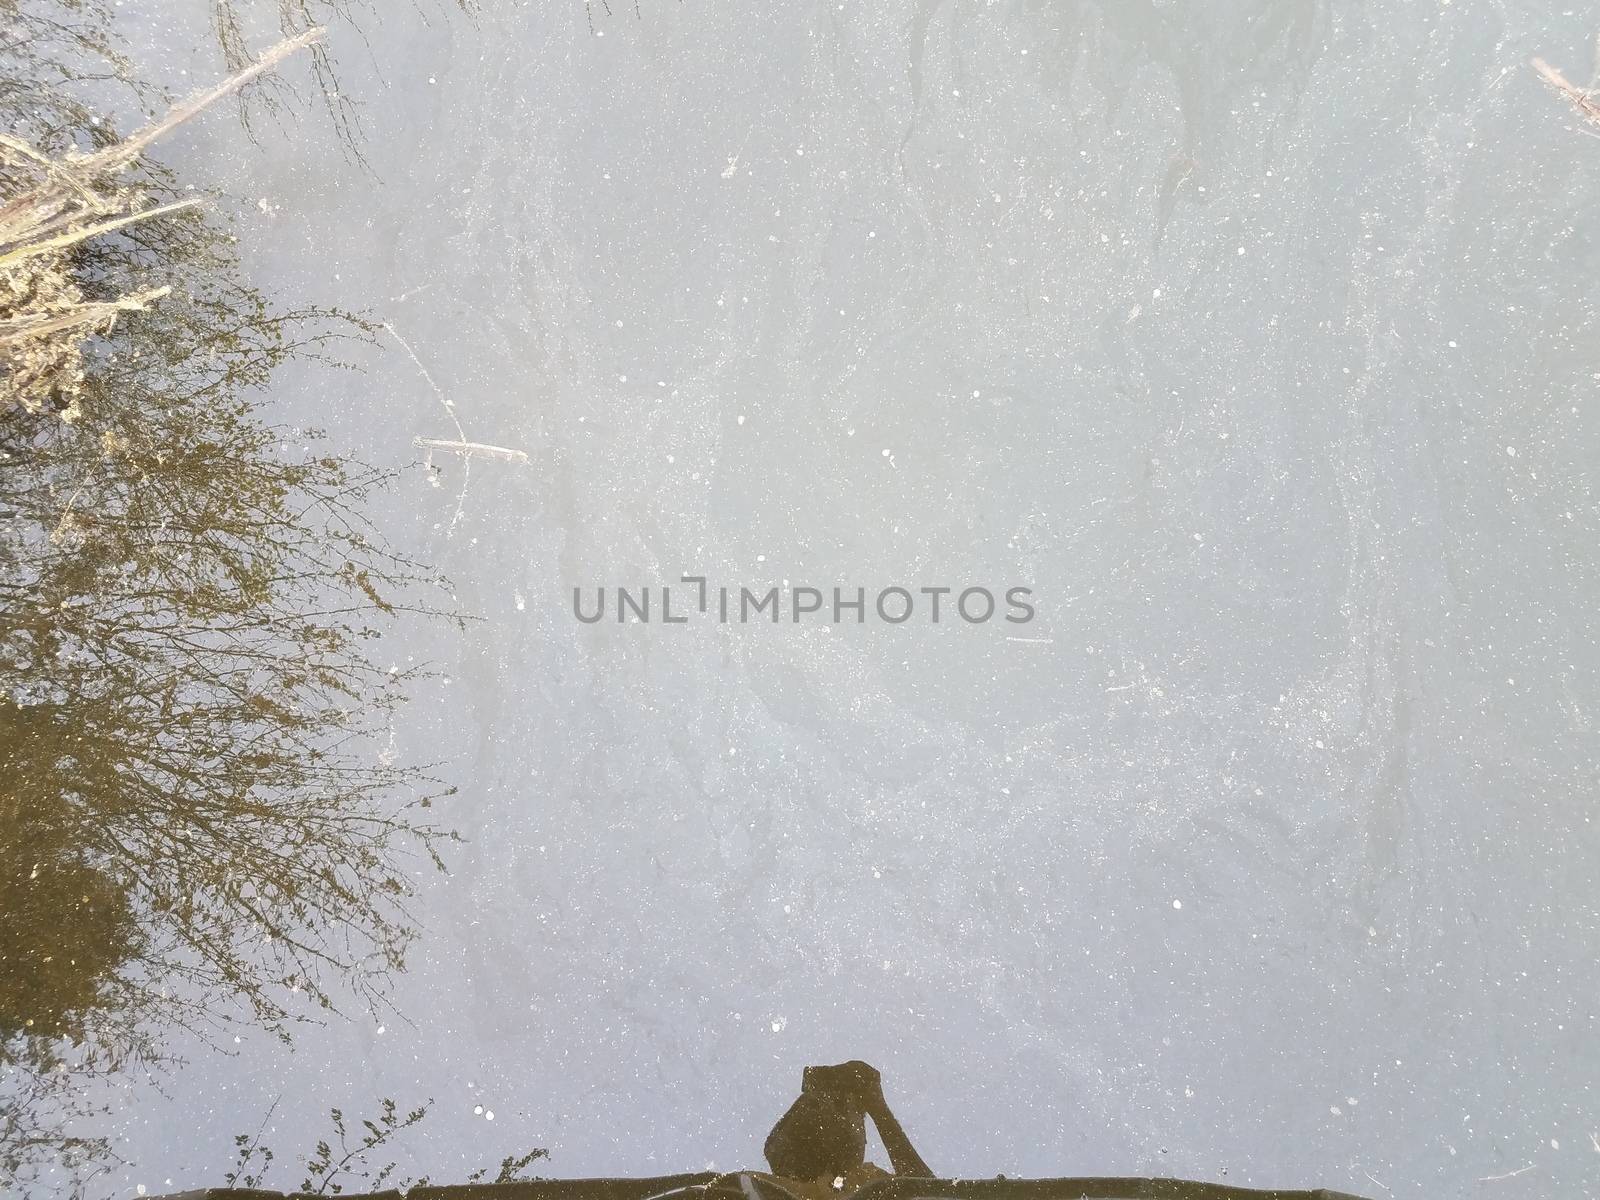 dirty or murky stagnant water with reflection of grasses and person by stockphotofan1